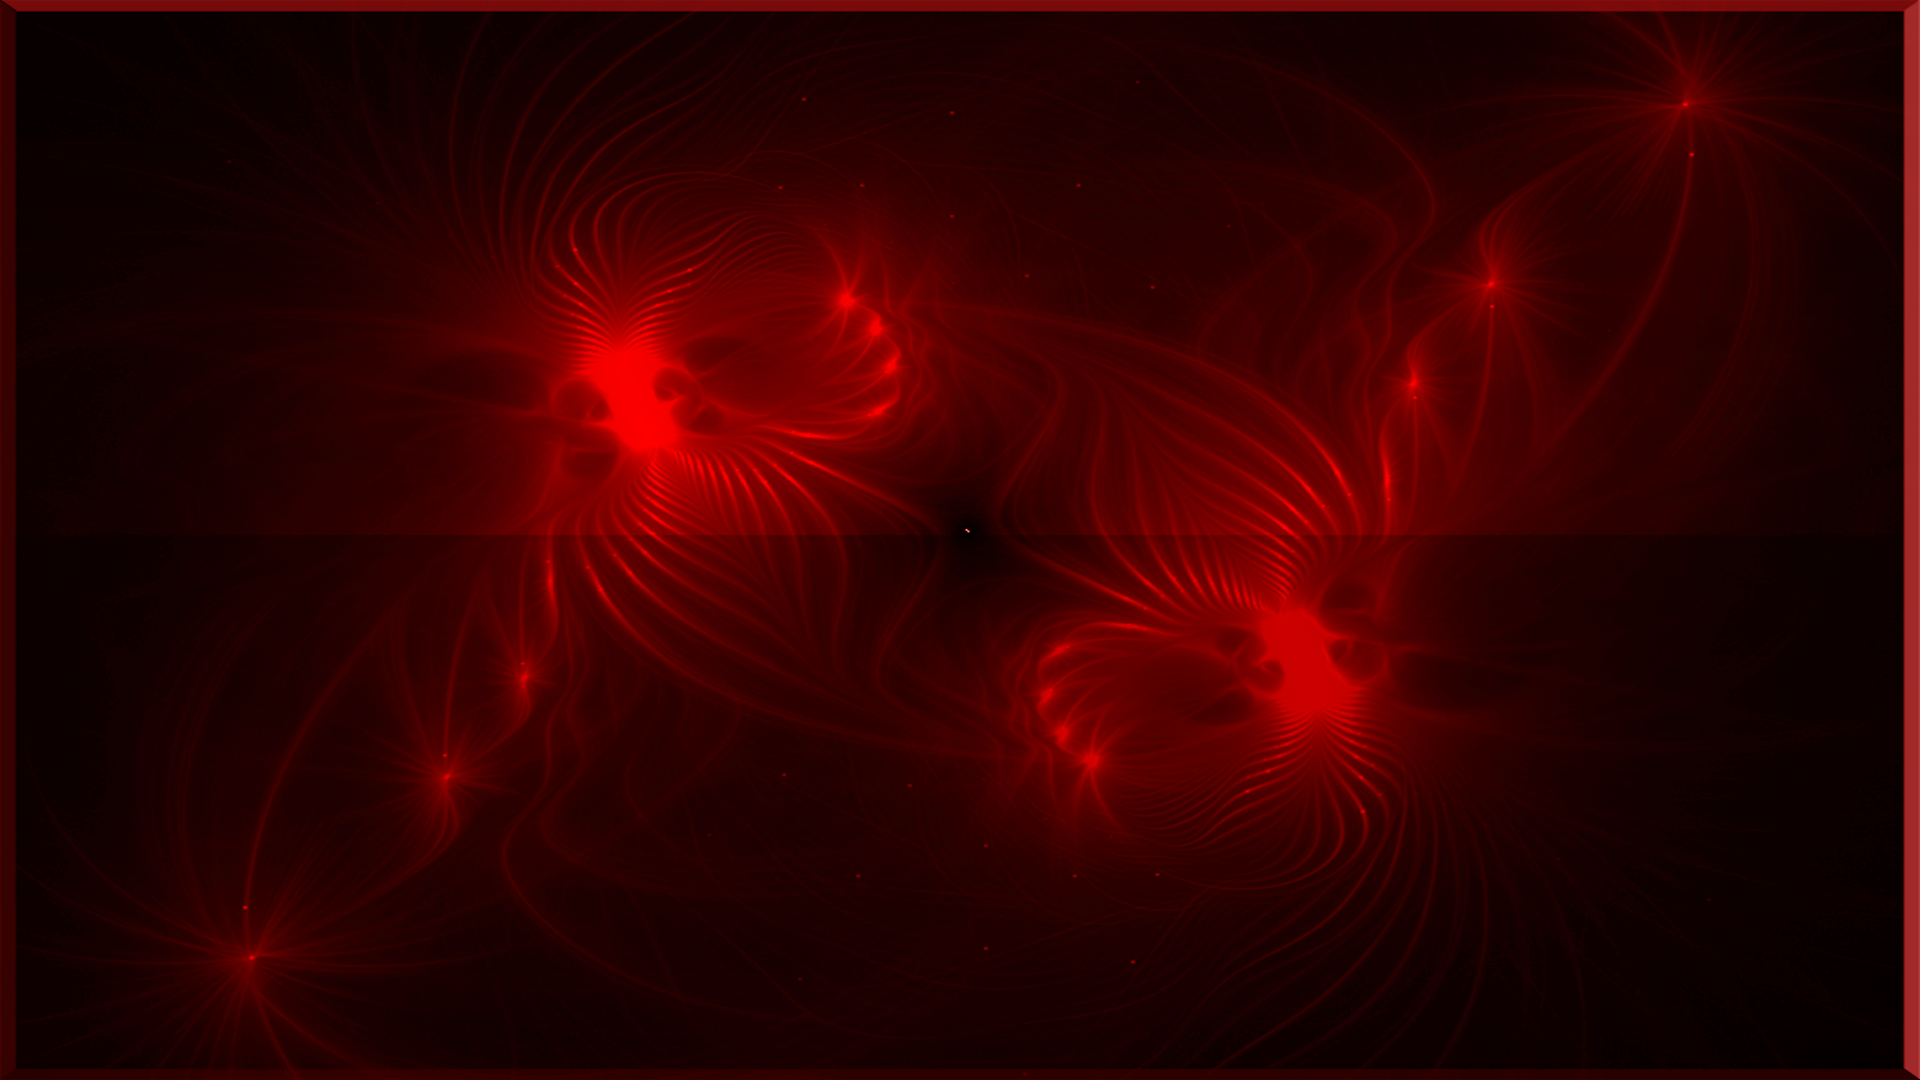 Red Fractals Full HD Wallpaper and Background Image | 1920x1080 | ID:375496